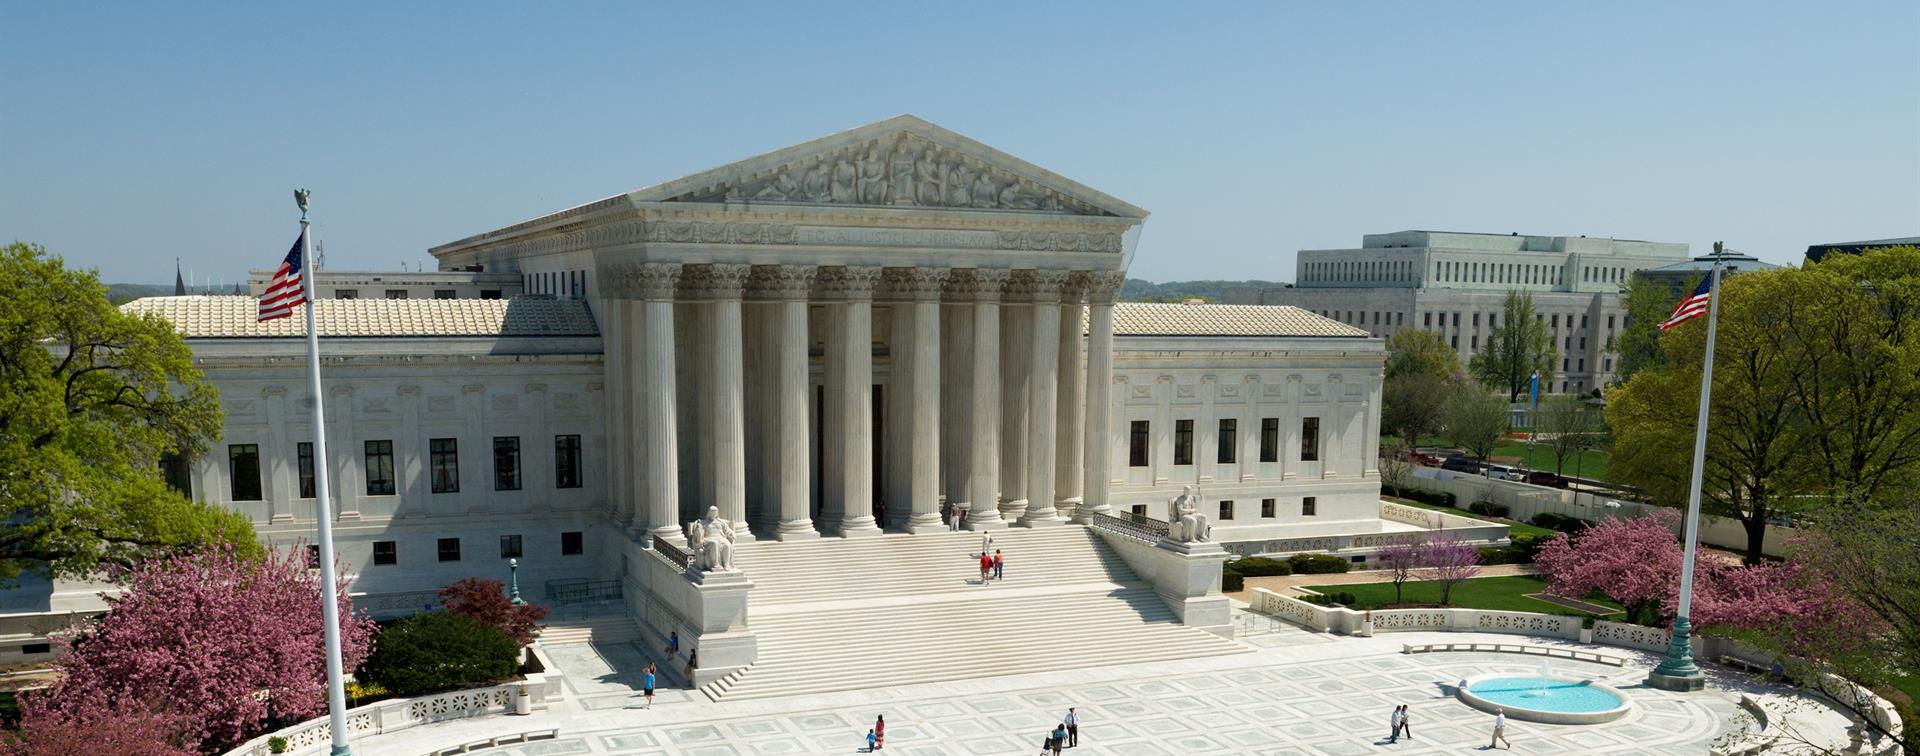 The front of the United States Supreme Court building